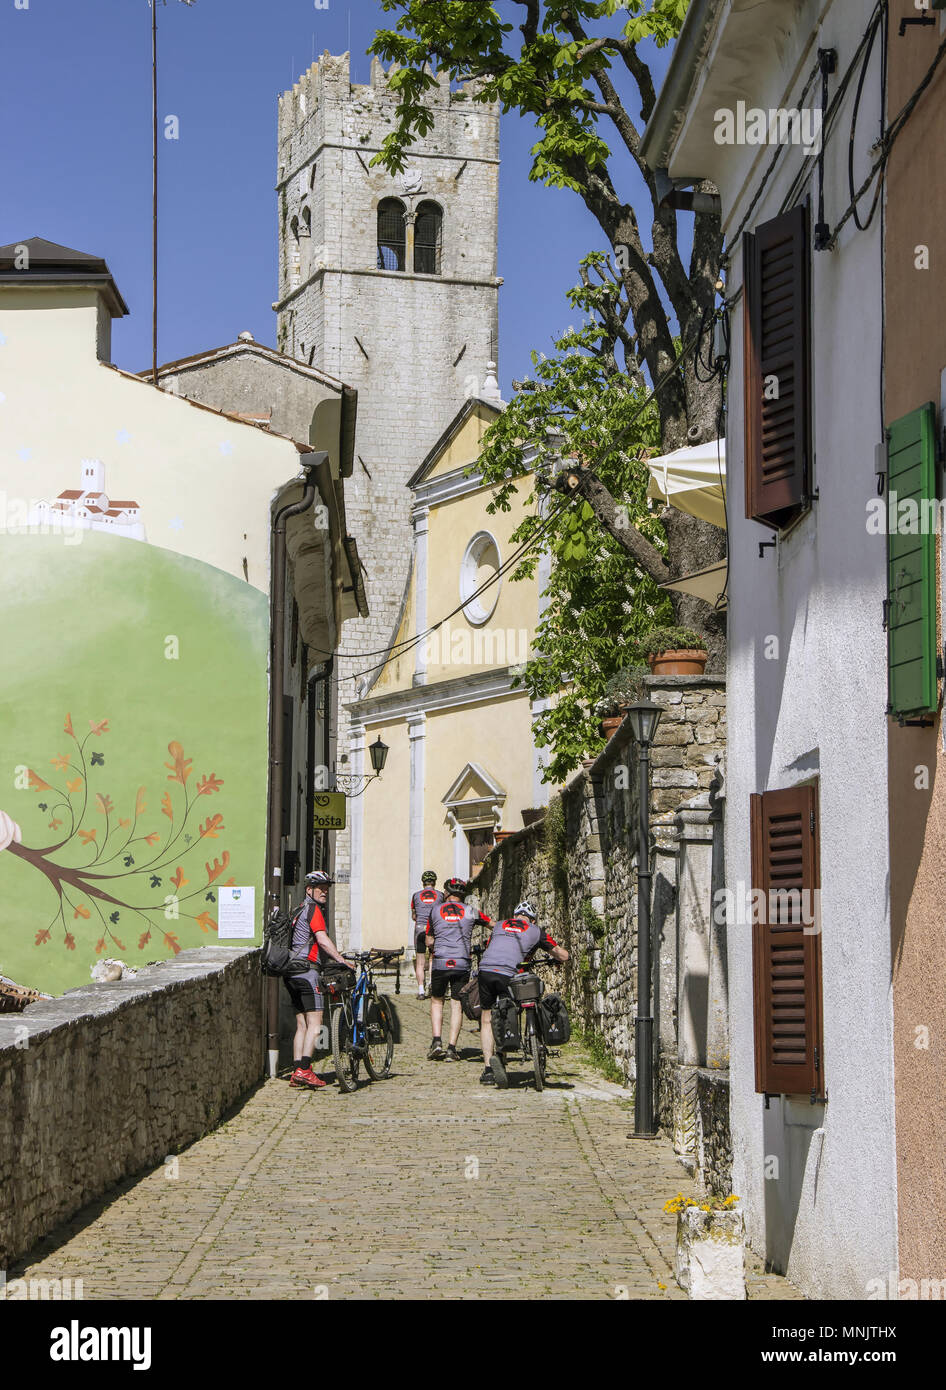 Central Istria, Croatia, April 2018 - Cyclists pushing their bicycles down the narrow cobbled street in the ancient town of Motovun Stock Photo